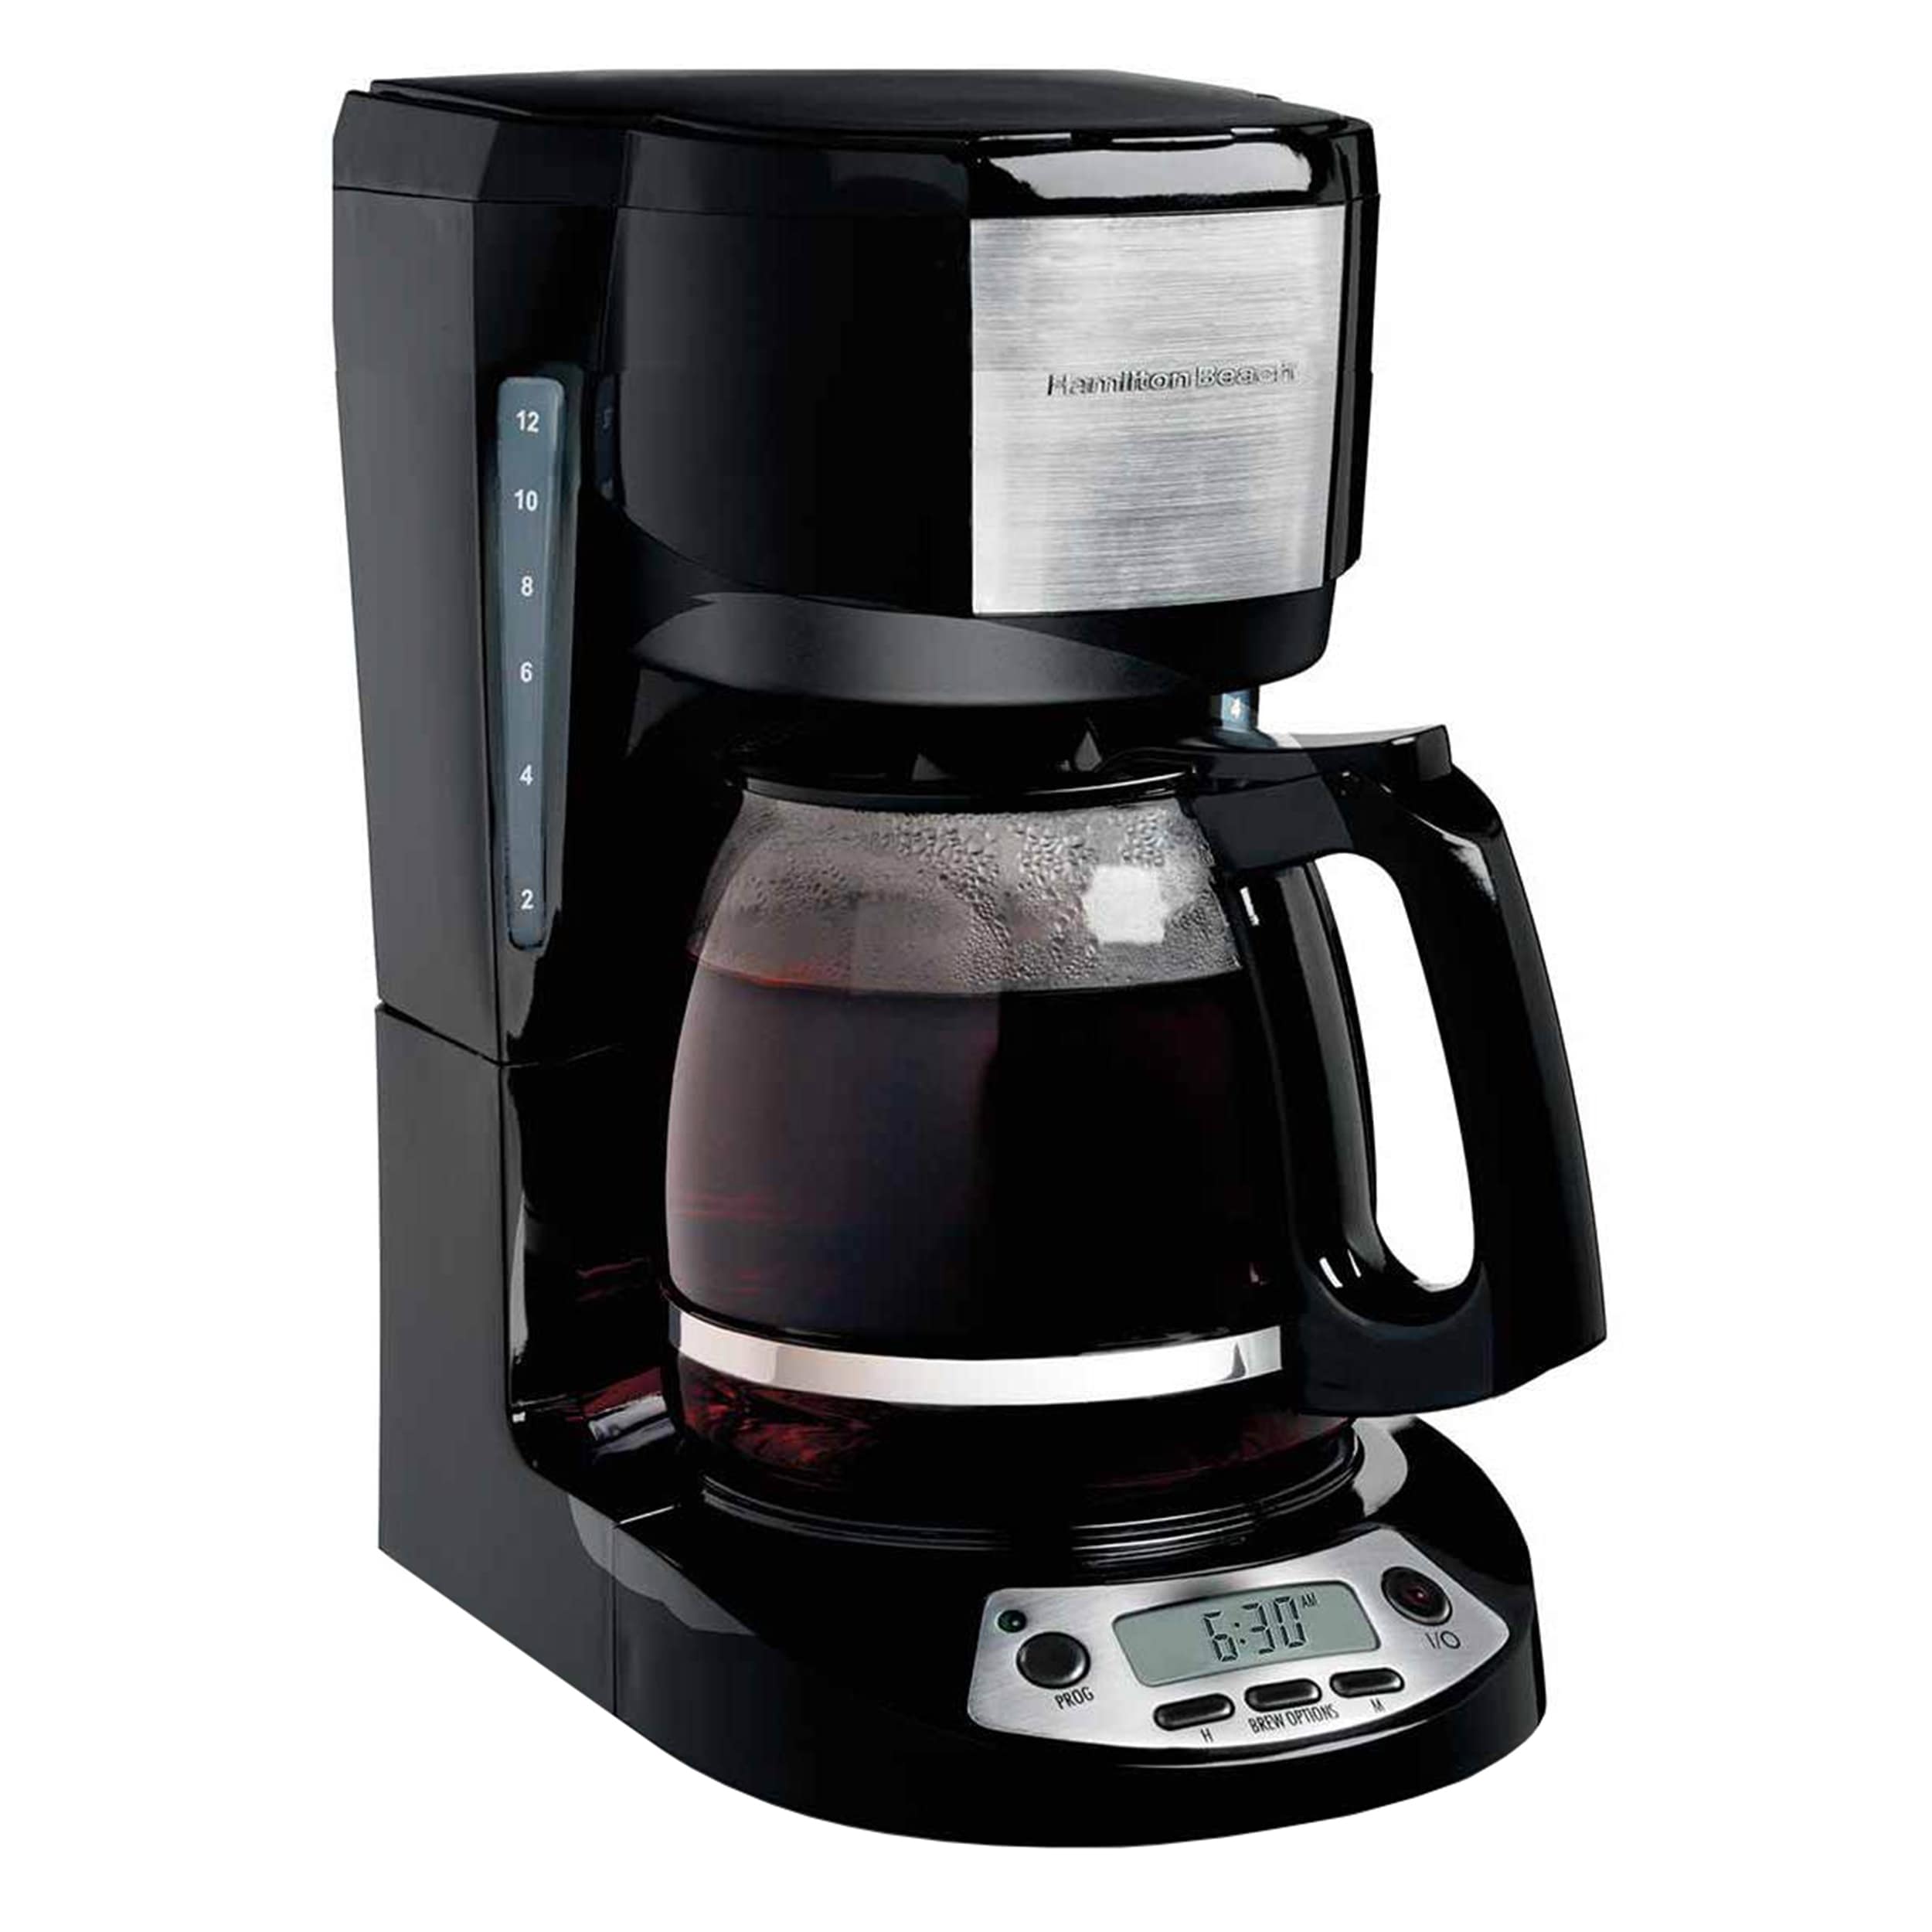 https://ak1.ostkcdn.com/images/products/is/images/direct/6f7019714e3ec50c397ac77be7512b5a89d02a77/Hamilton-Beach-12-Cup-Programmable-Coffee-Maker-in-Black.jpg